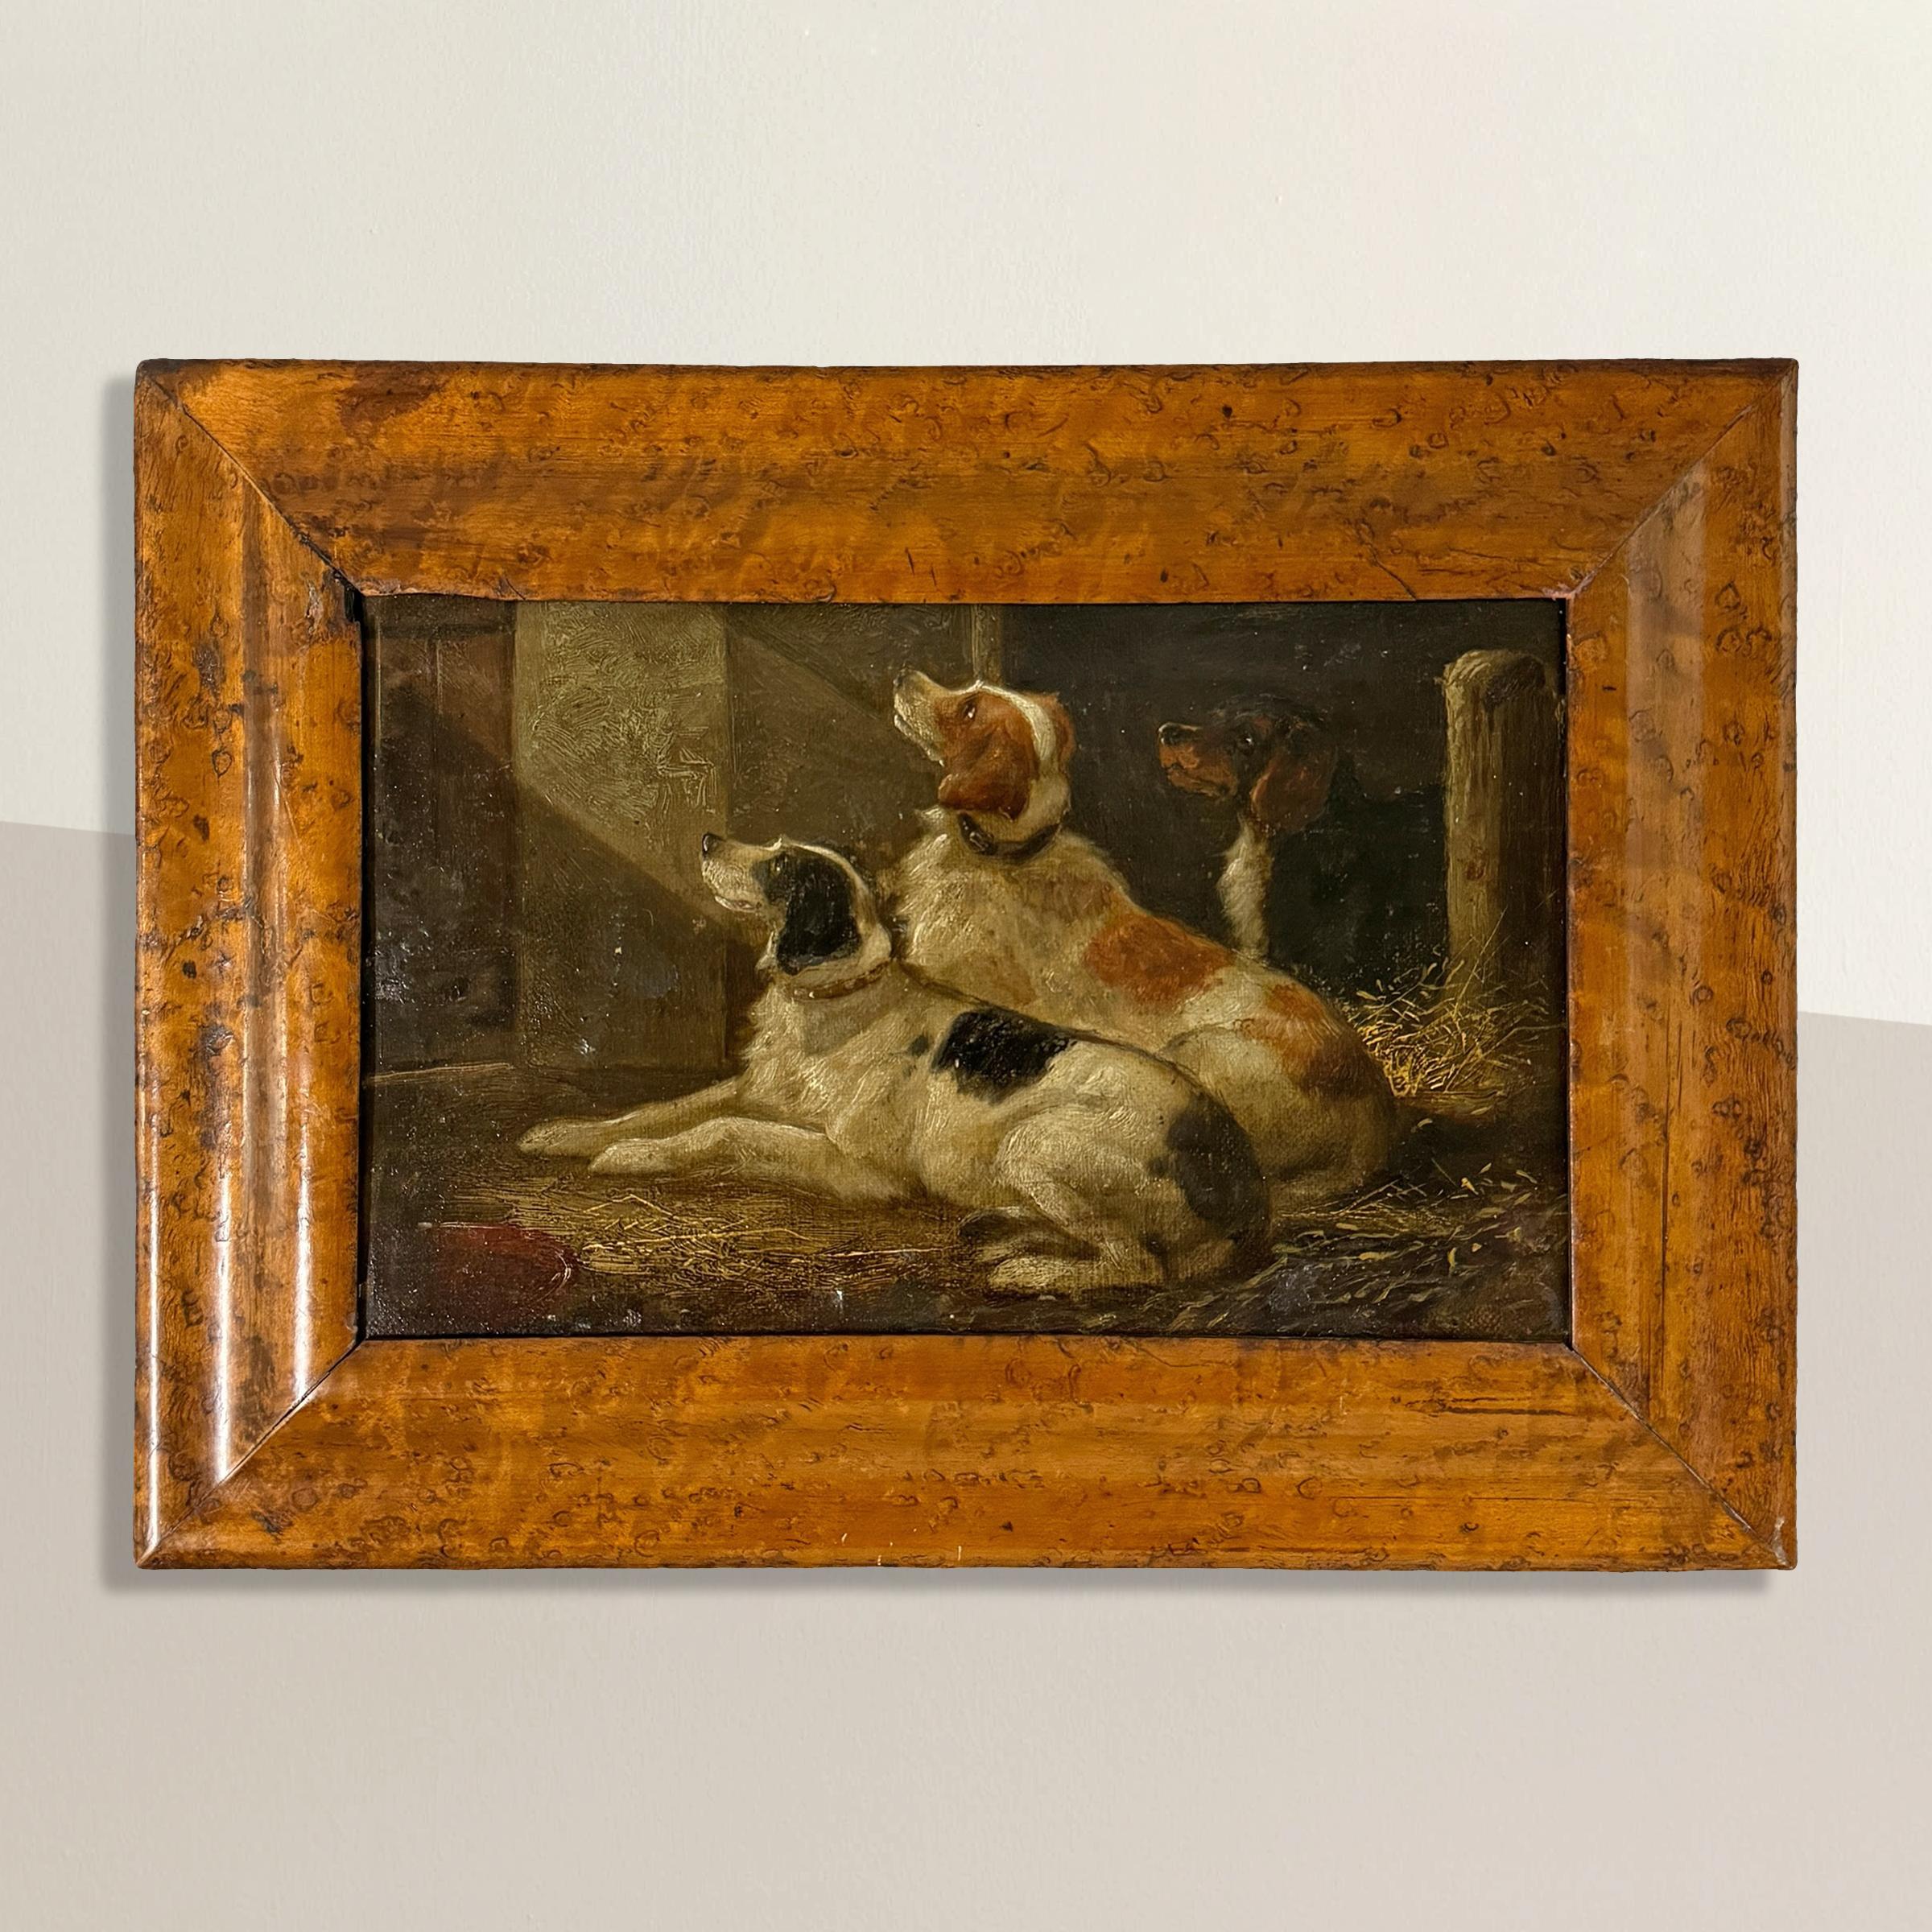 In this exquisite 19th-century English oil on board painting, the rustic charm of a country barn comes to life as three spaniels rest peacefully in a bed of straw. Their attentive gazes, fixed upward and out of frame, suggest anticipation as they